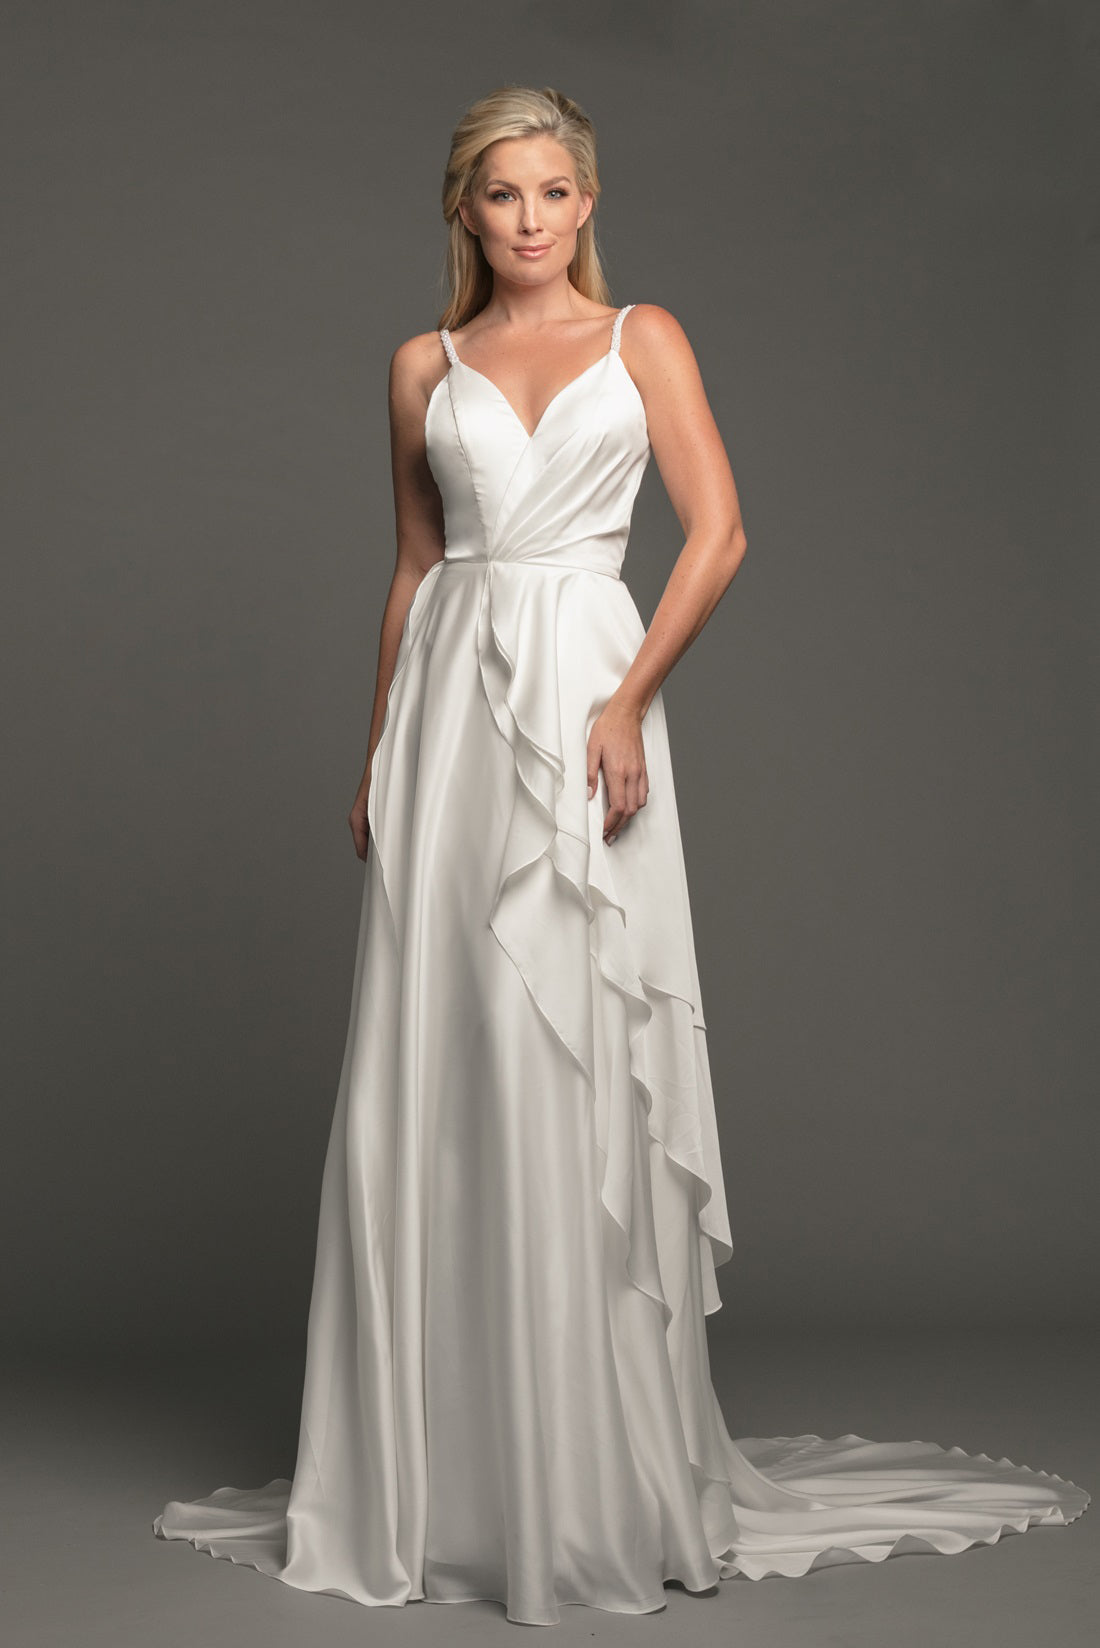 Make your entrance in Johnathan Kayne's B114 Size 8 Ivory Charmeuse Ruffle Destination Wedding Dress. This exquisite bridal gown showcases a beaded strap bodice, airy ruffle skirt, and ivory charmeuse material that will flatter your figure. Perfect for a formal or destination wedding, it's the perfect gown you need to look and feel amazing.  Size: 8  Color: Ivory